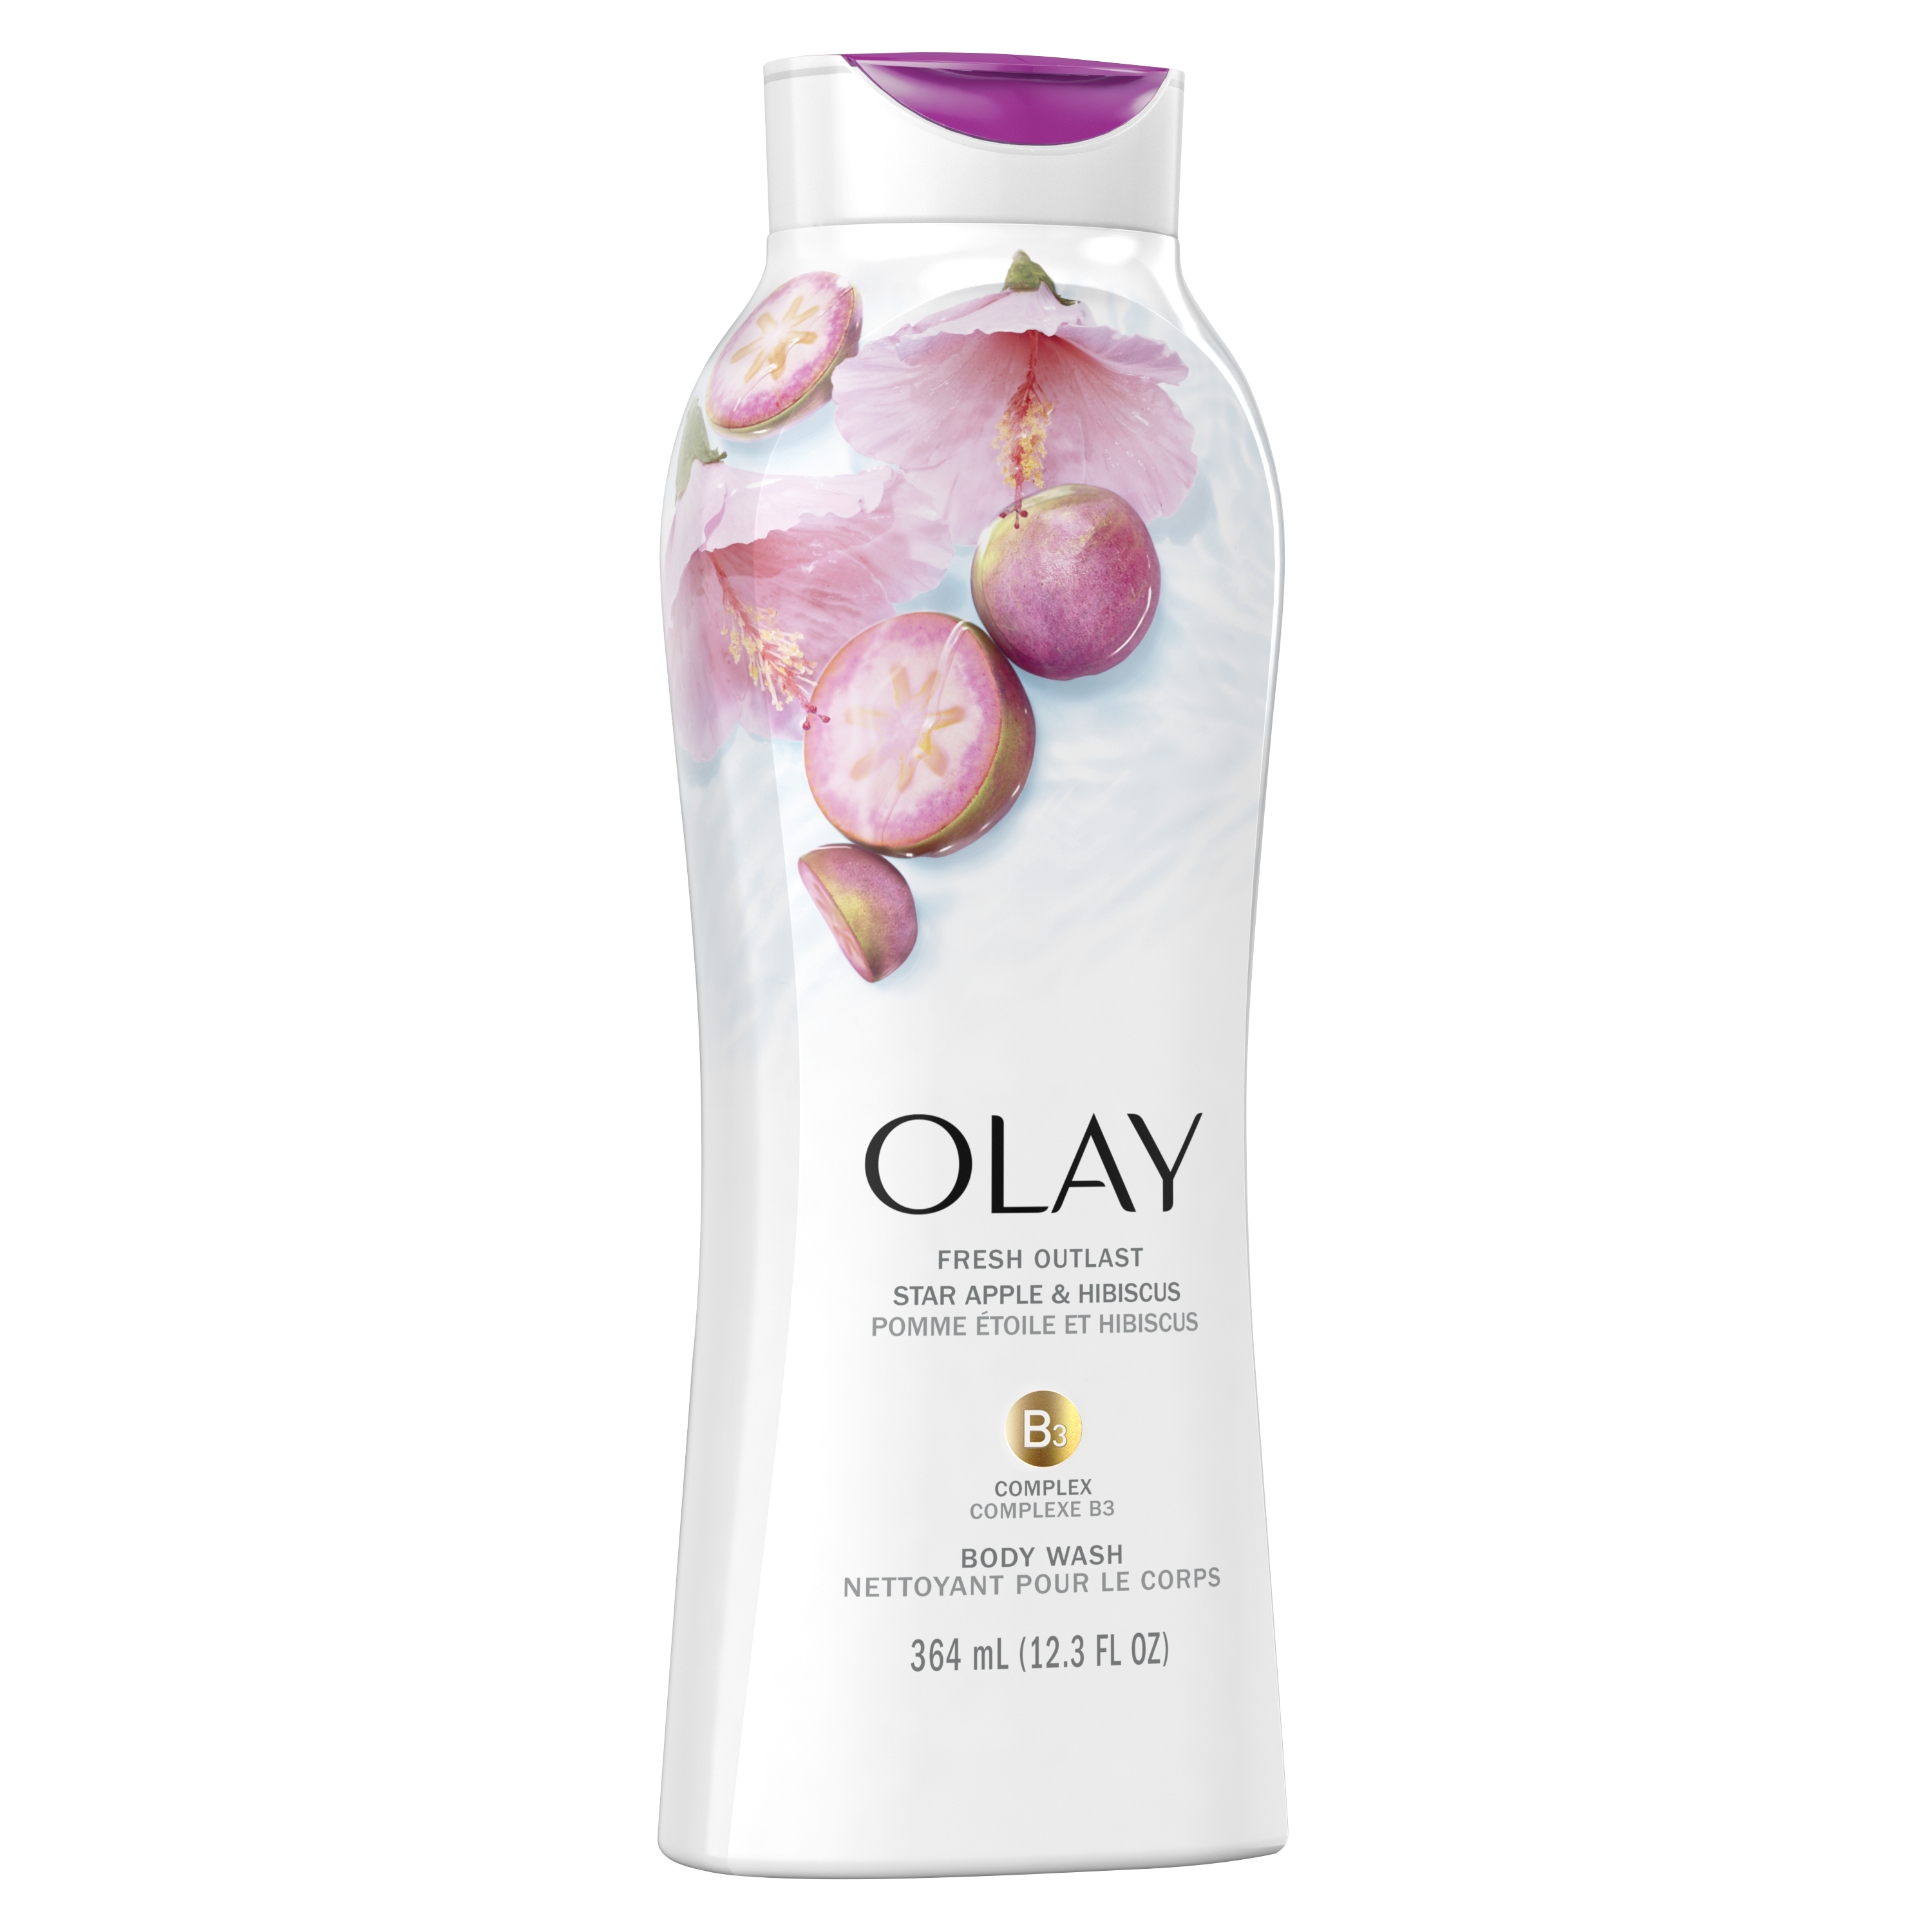 Star Apple and Hibiscus Fresh Outlast Body Wash_1